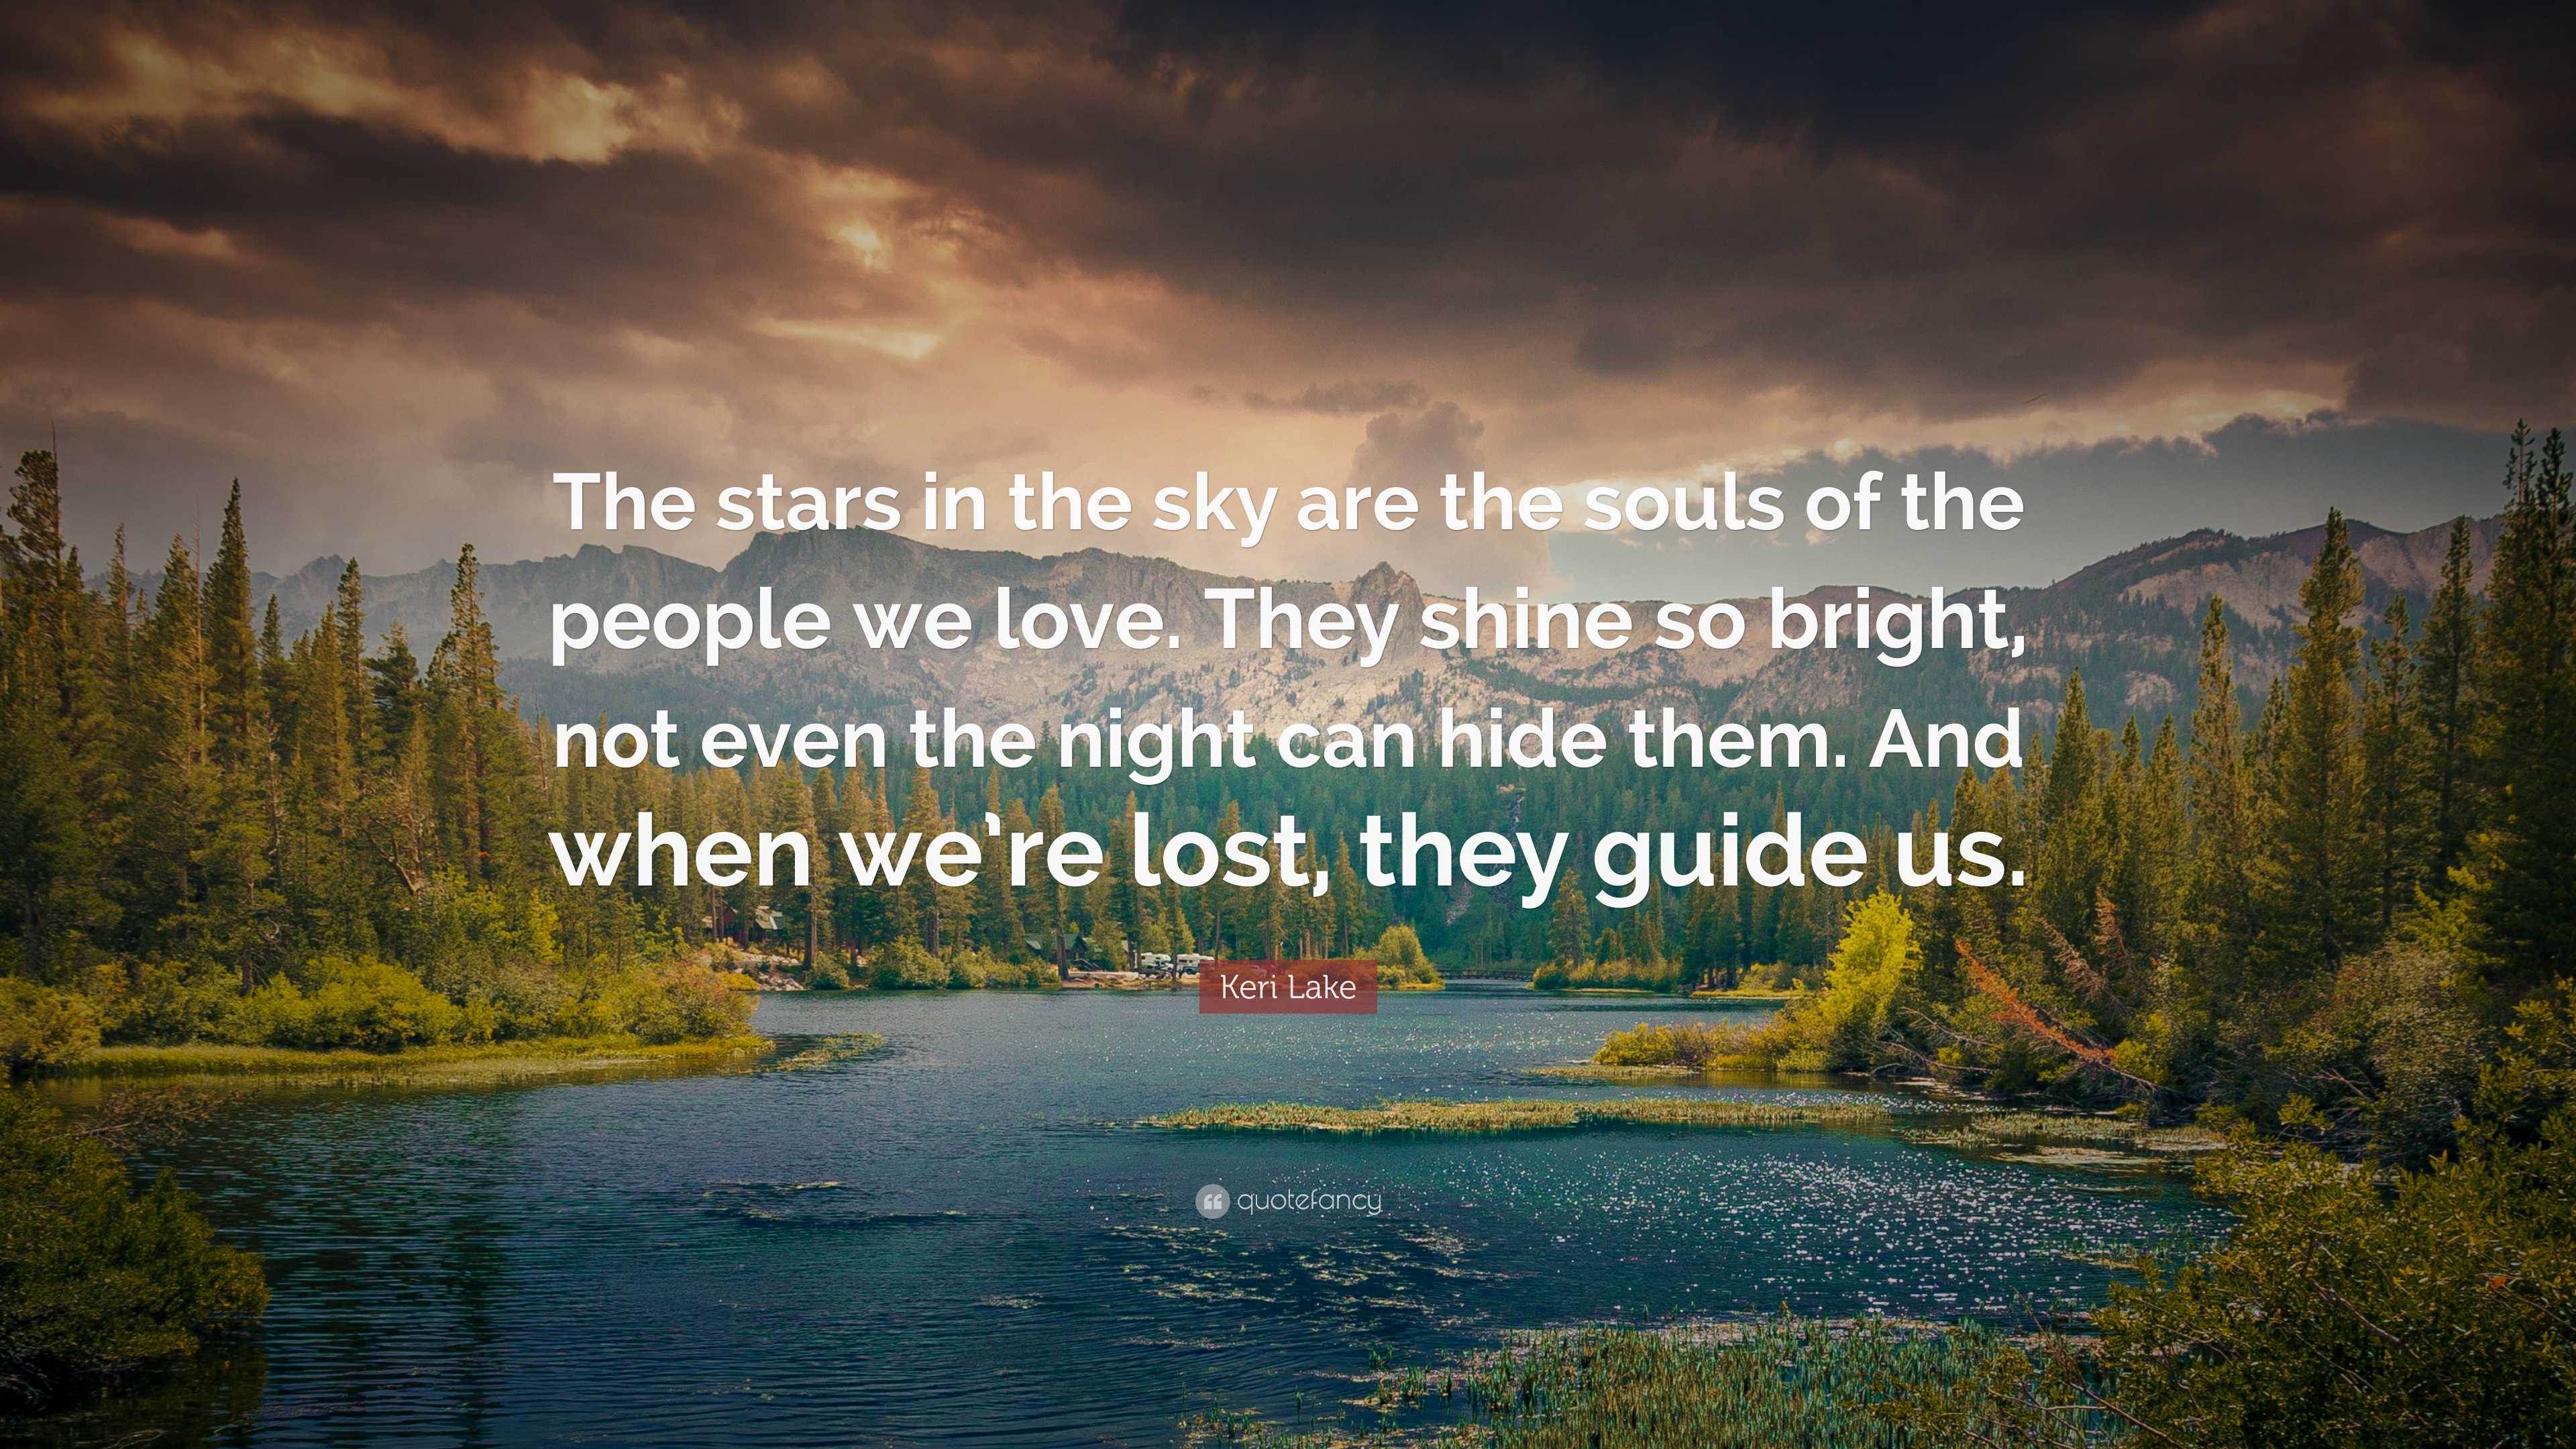 Keri Lake Quote: “The stars in the sky are the souls of the people